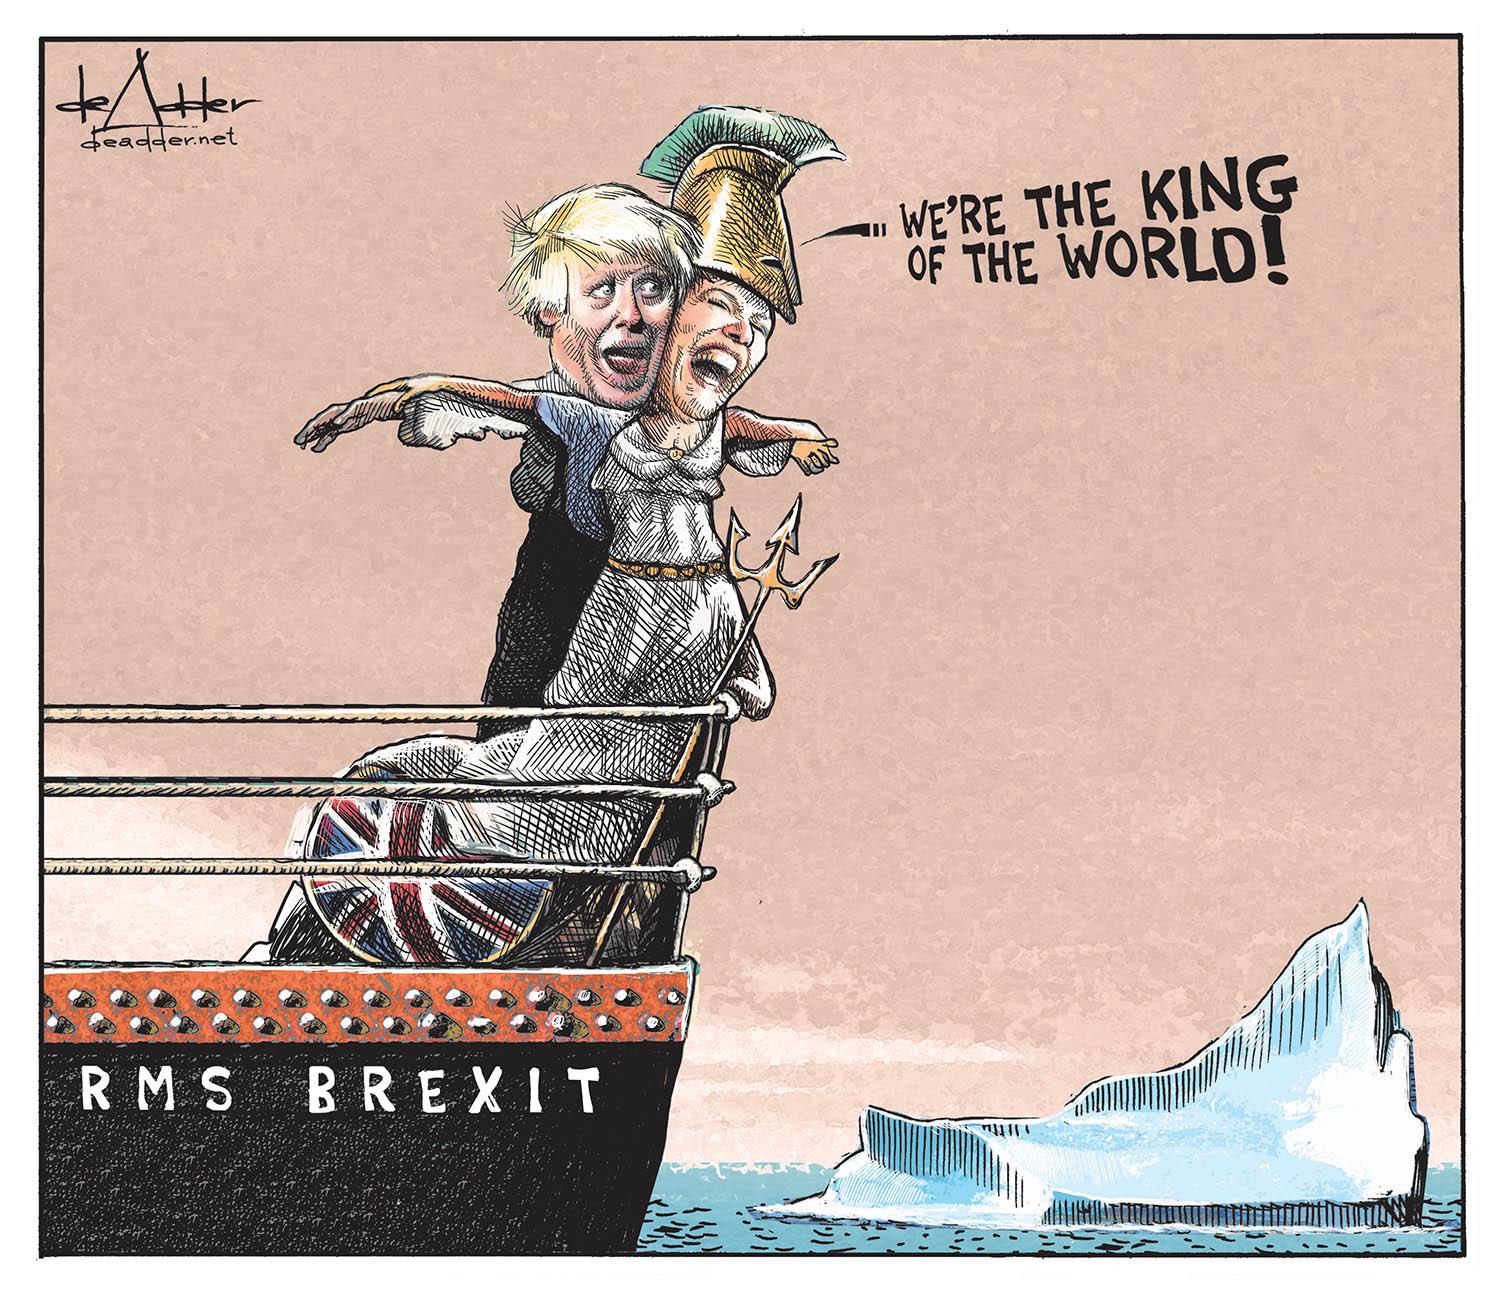 A twist on the I'm king of the world' image from Titanic.. with Boris Johnson as Leo Dicaprio